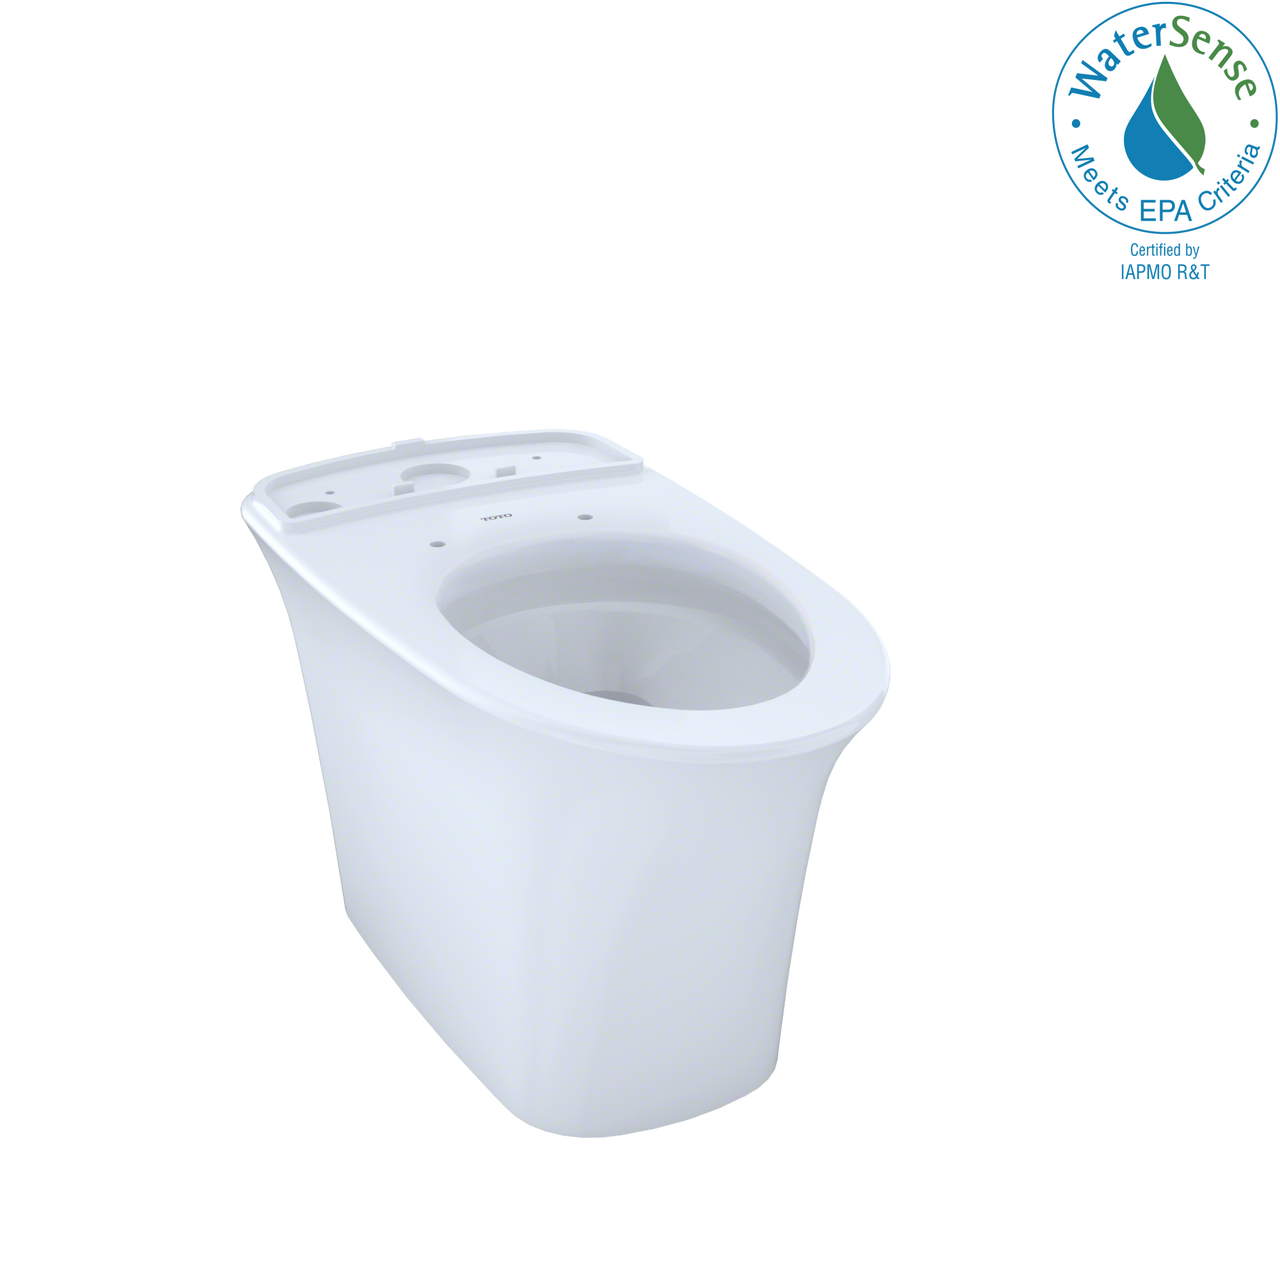 TOTO Maris Universal Height Elongated Skirted Toilet Bowl with CeFiONtect,  - CT484CEFG#01 - BNGBath